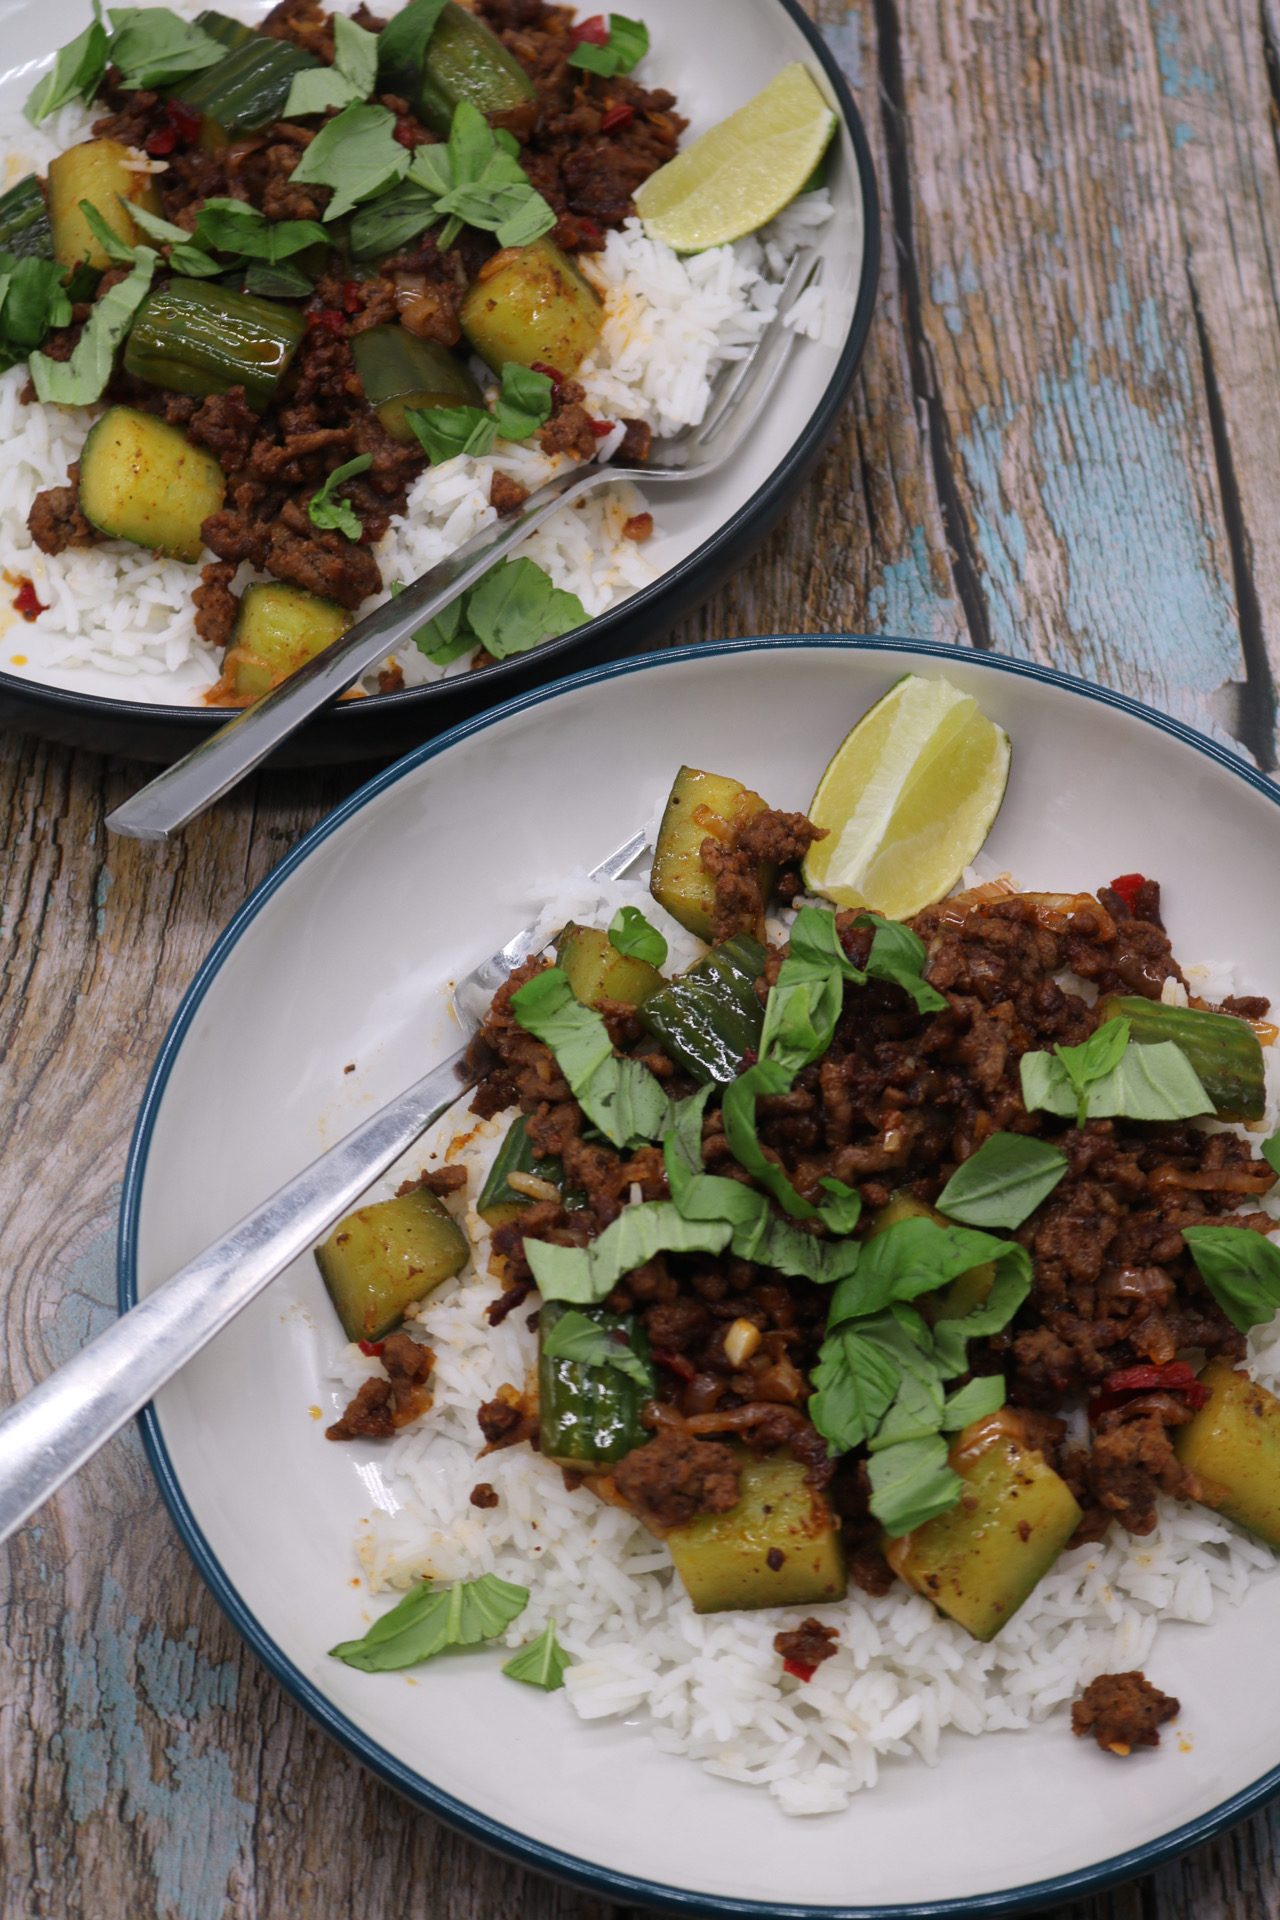 Spicy Beef and Crushed Cucumber Stir-Fry, Spicy Beef and Crushed Cucumber Stir-Fry